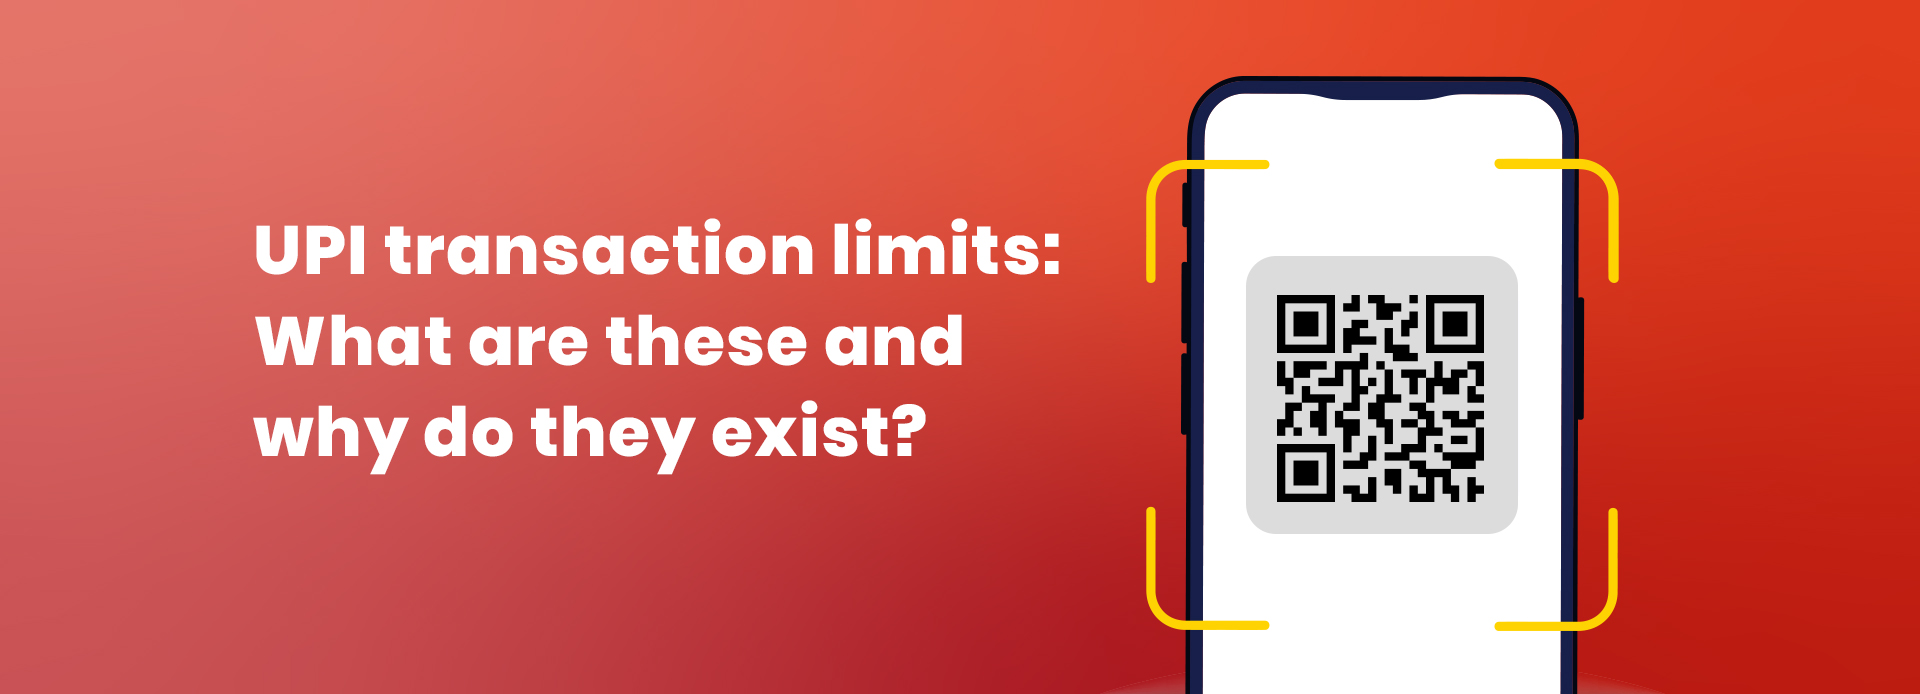 UPI transaction limits: What are these and why do they exist?